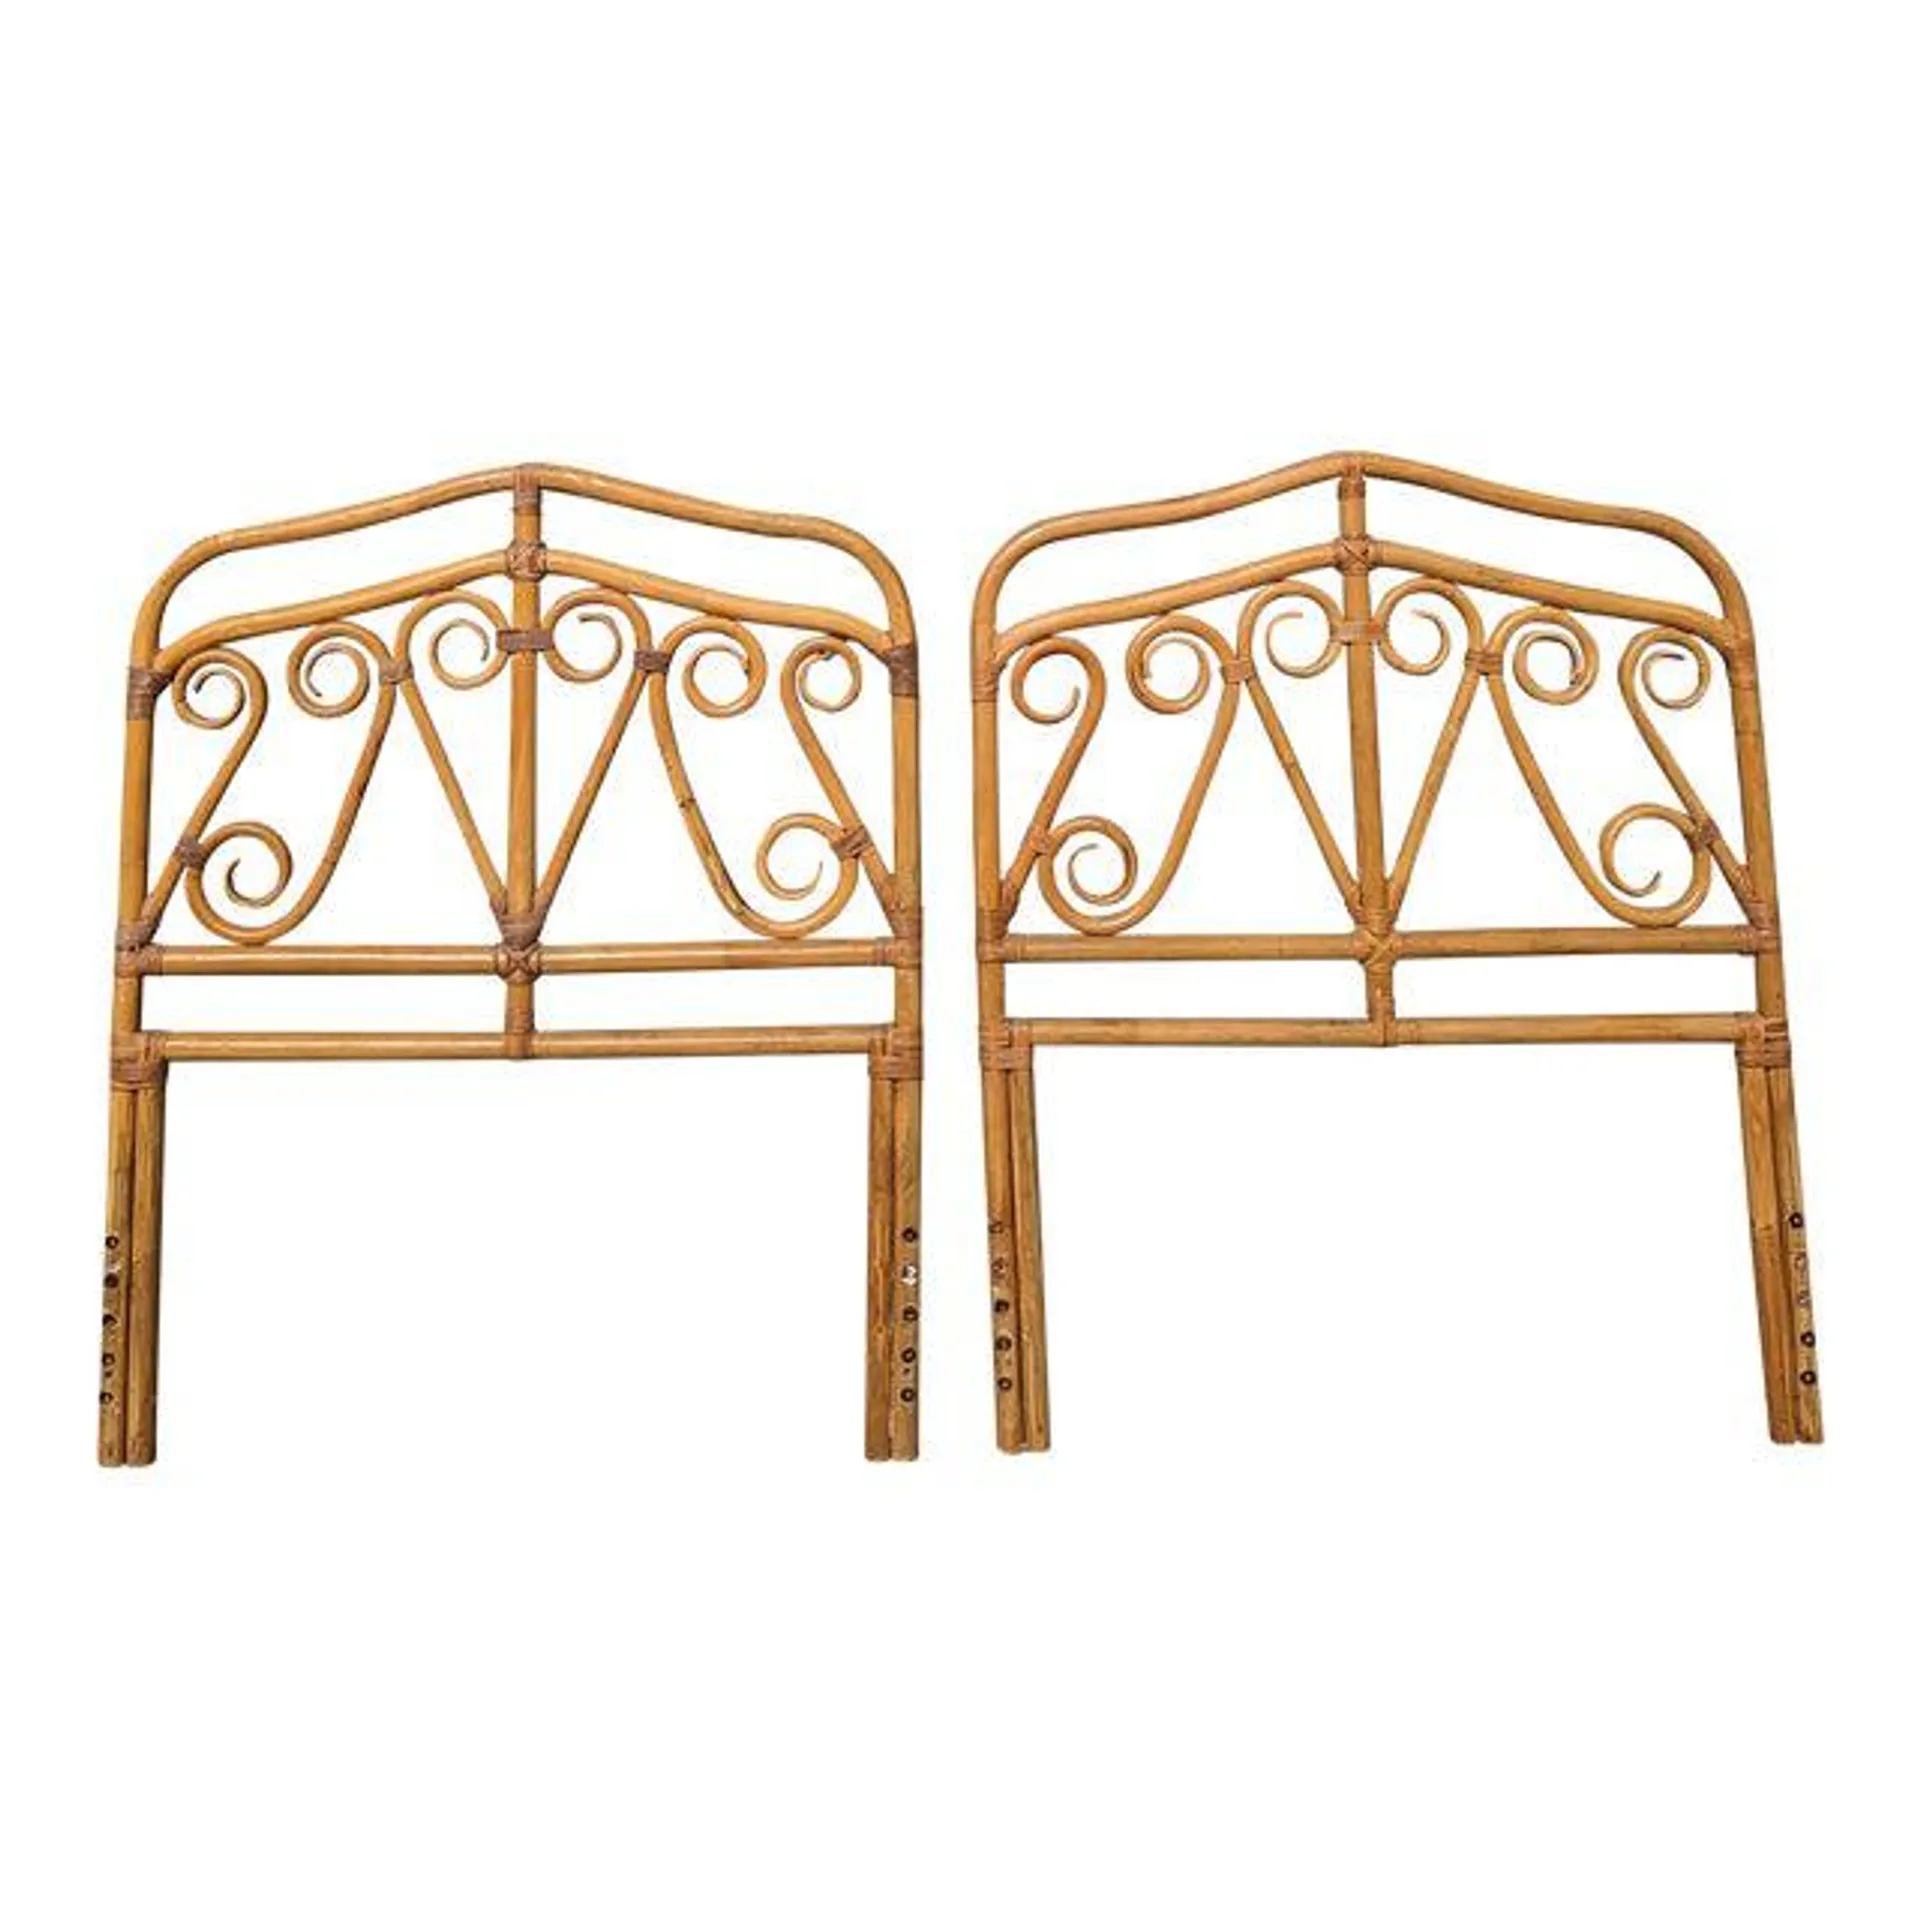 1970s Vintage Twin Bamboo Headboards - a Pair